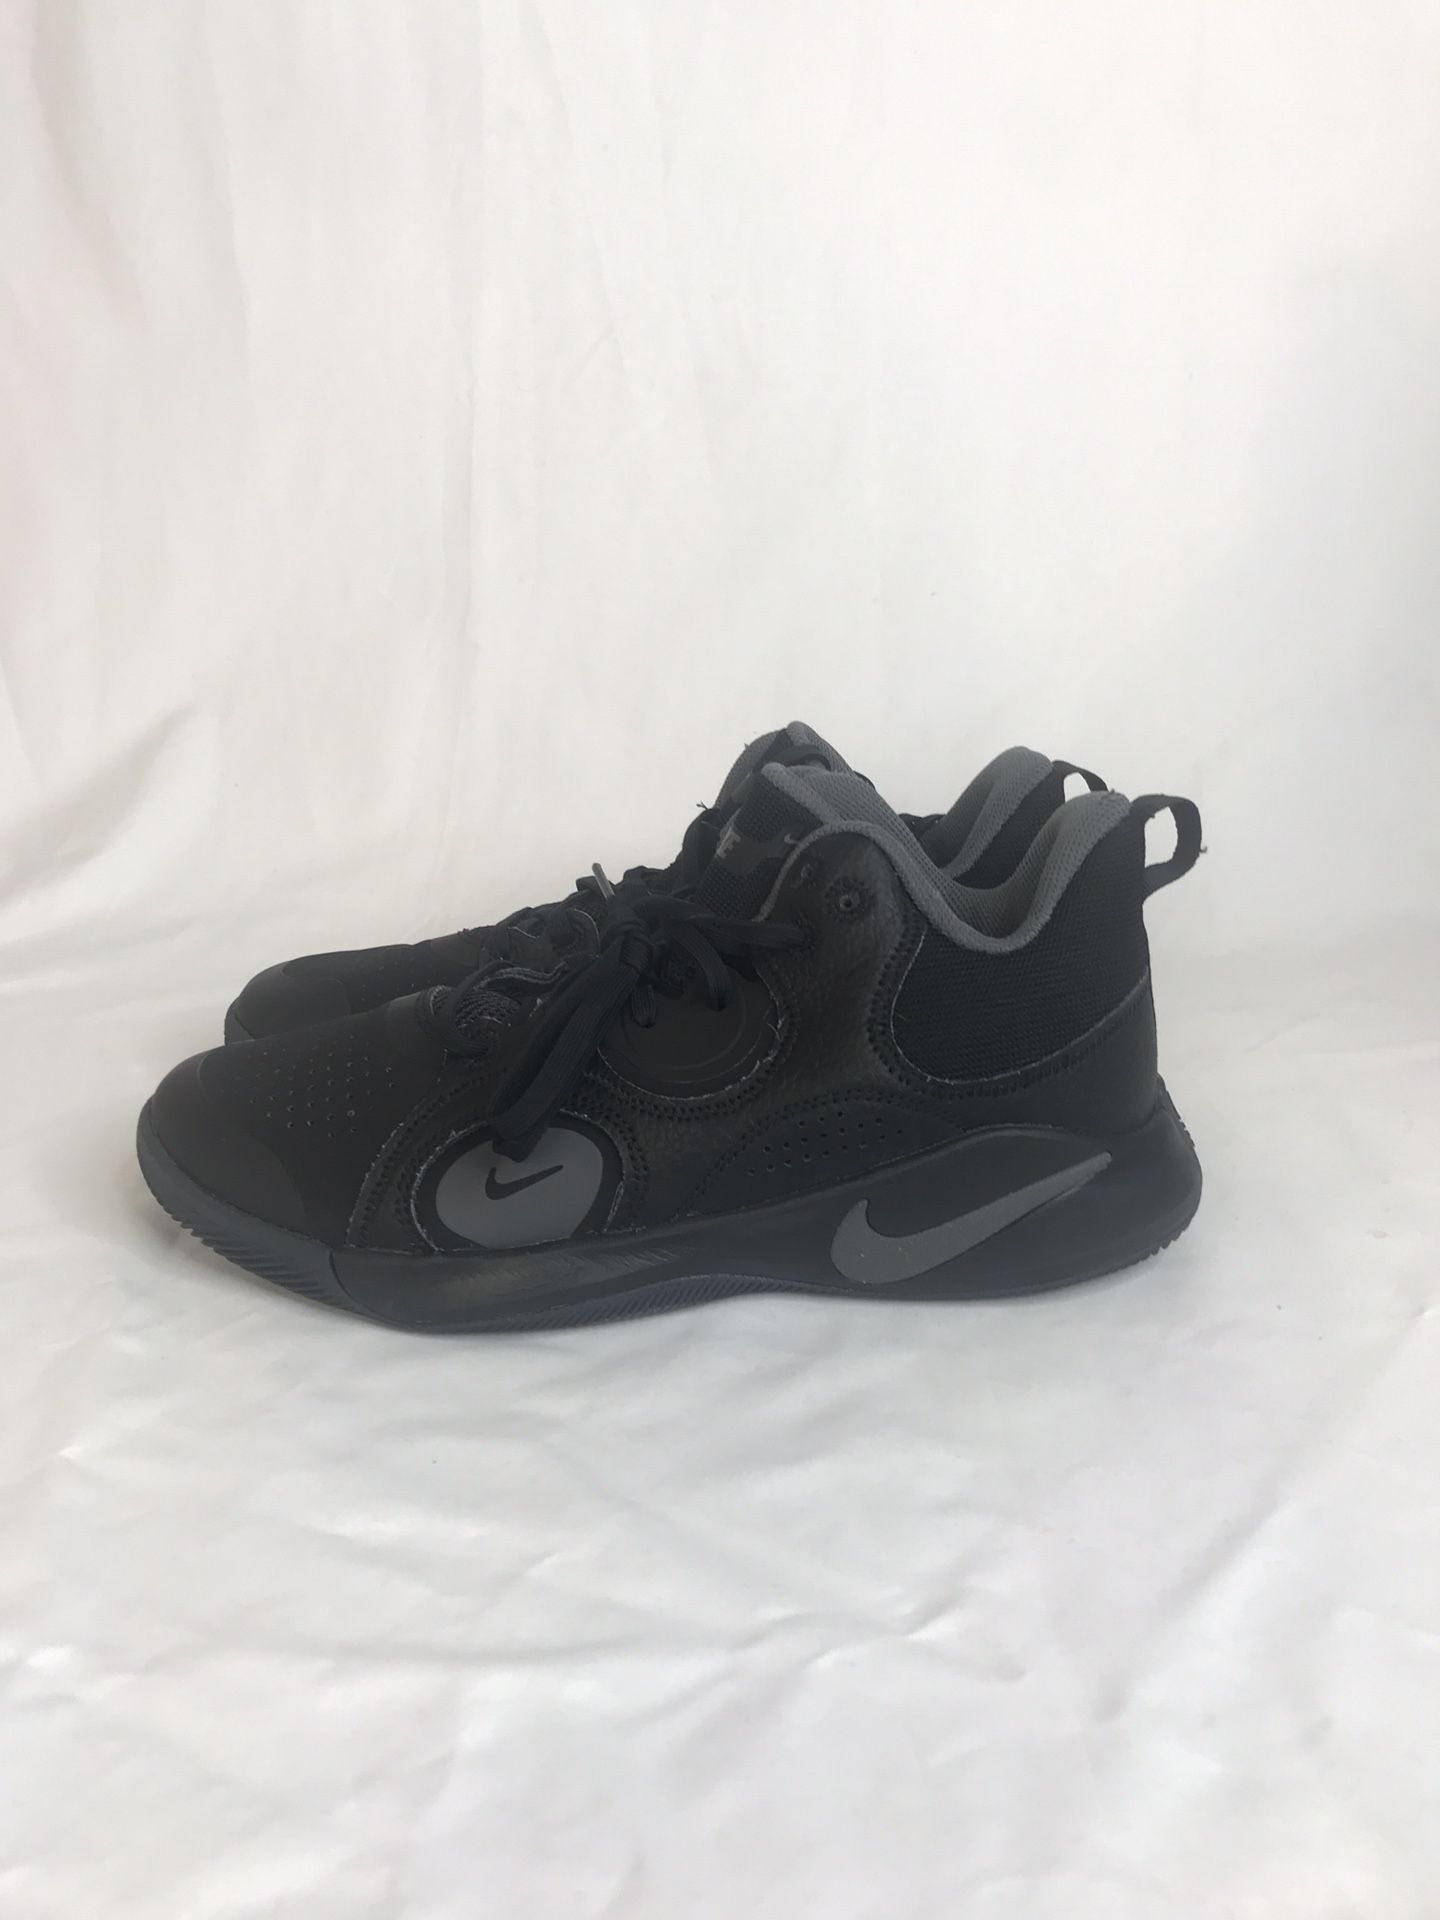 Nike Fly By Mid 2 NBK Basketball Shoes Mens US 8 Black Sneakers CU3501-004